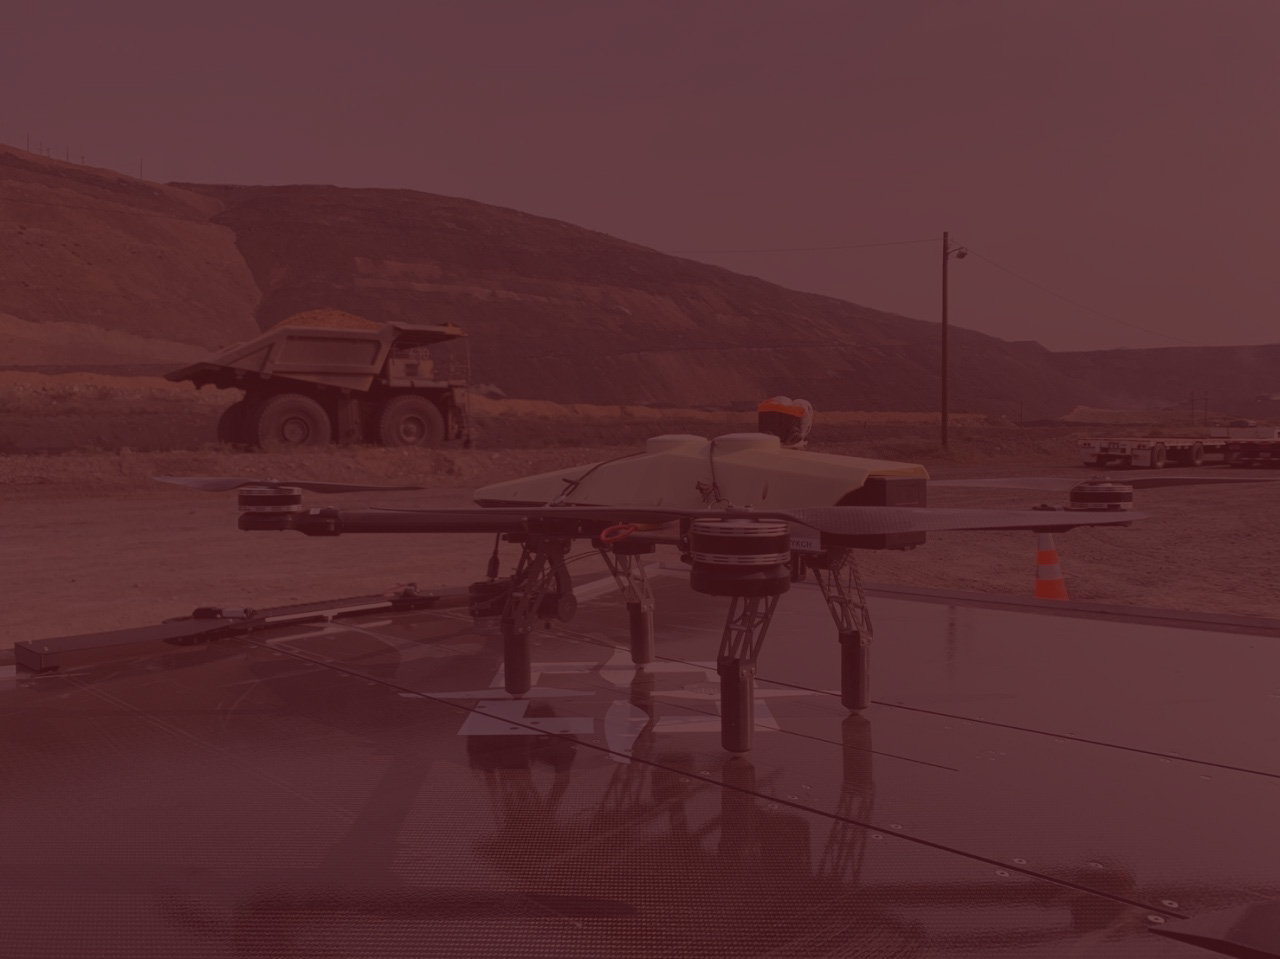 Hitting a Milestone: 25,000+ Automated Drone Missions